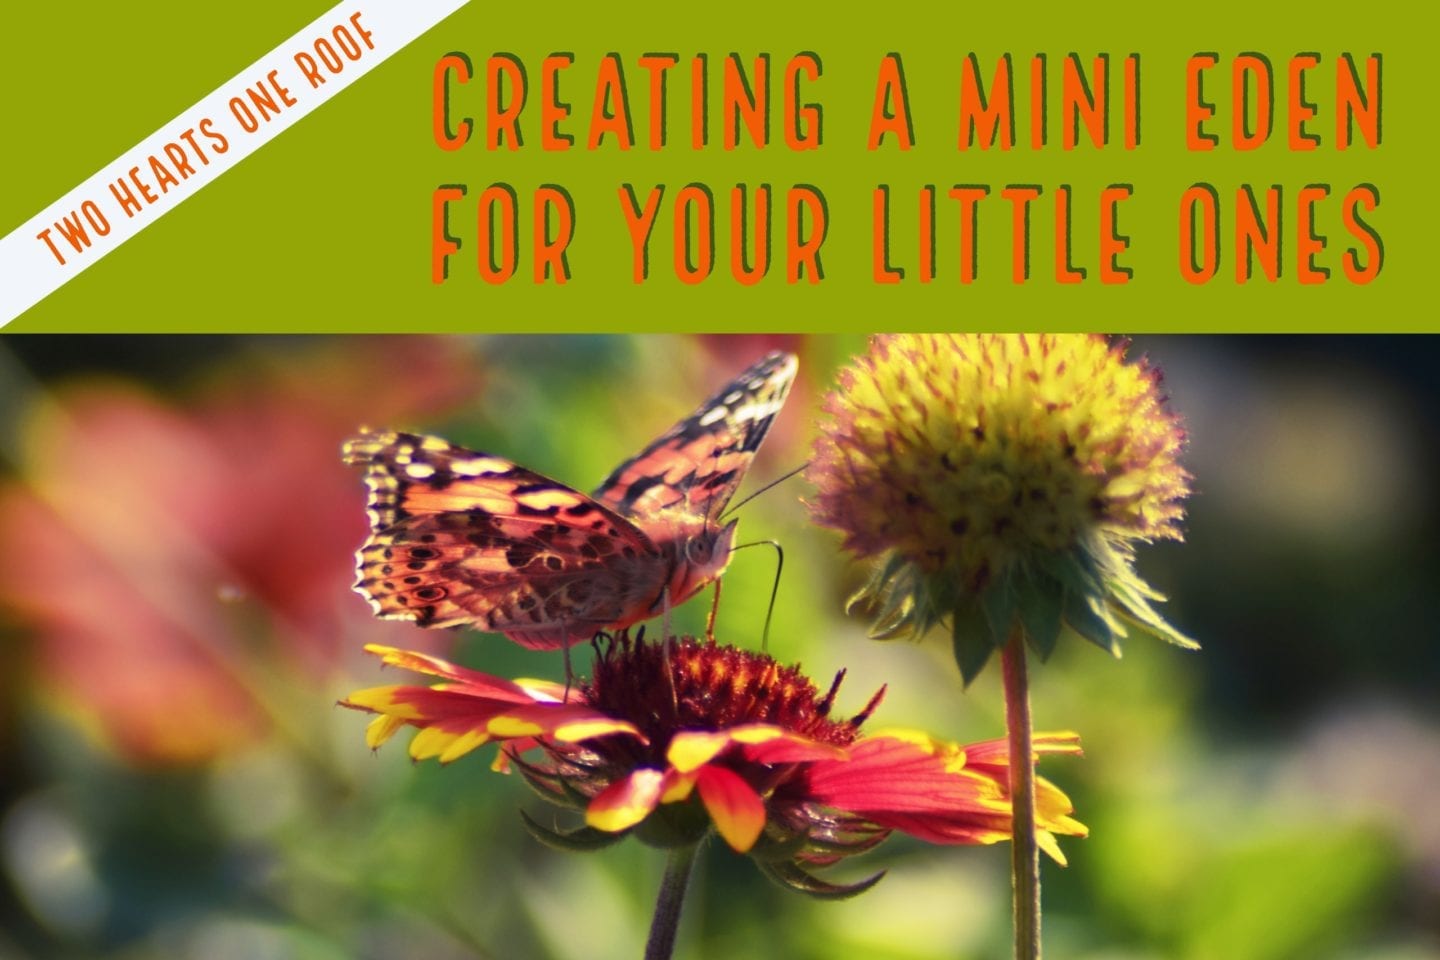 Creating a Mini Eden for Your Little Ones to Learn and Explore